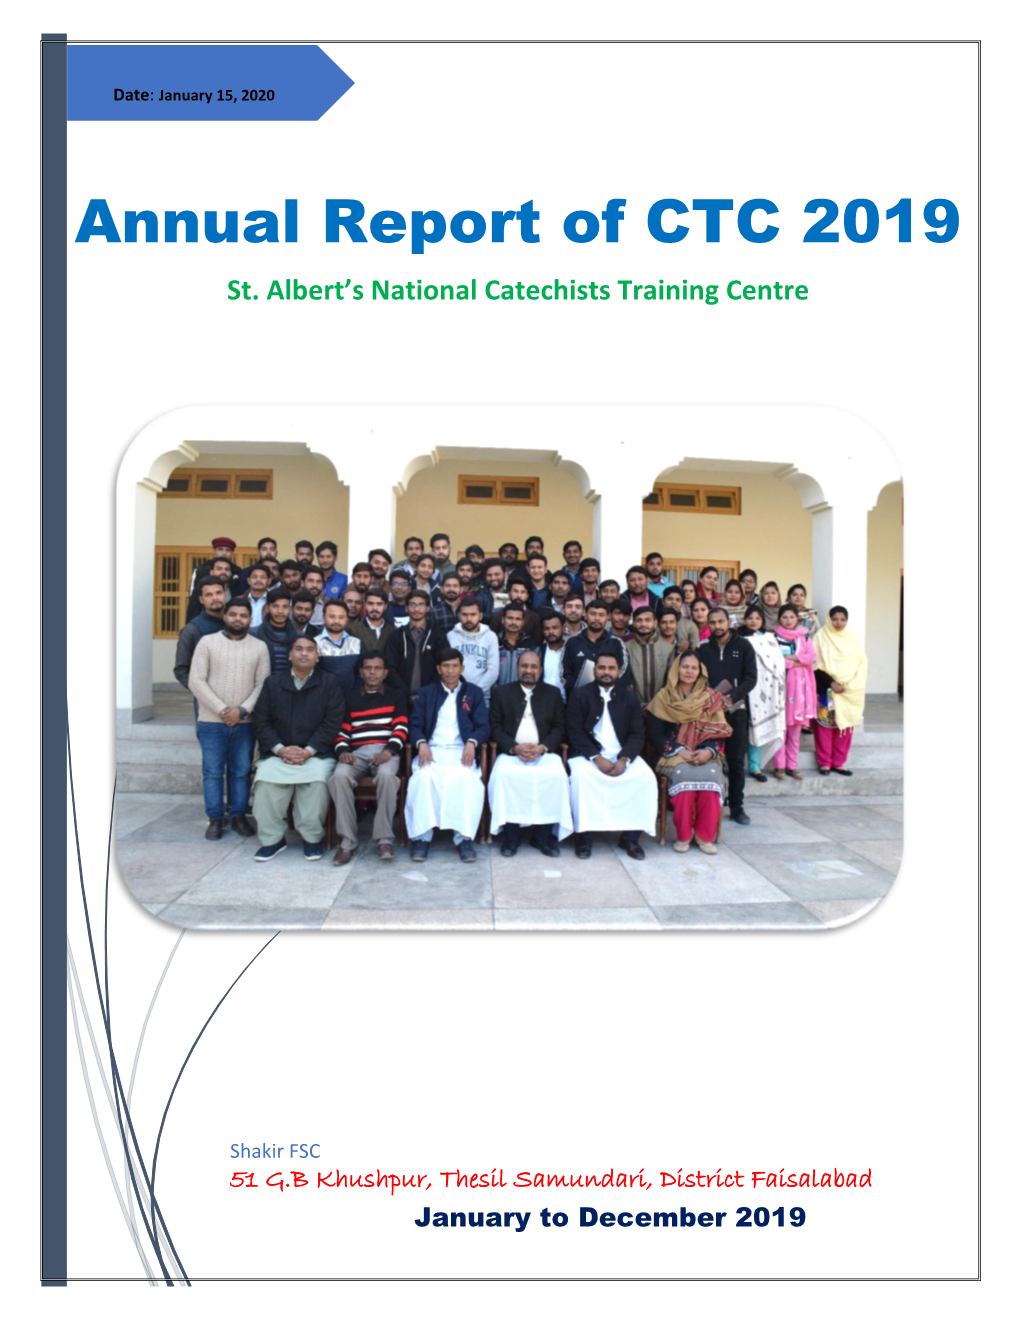 Annual Report of CTC 2019 St